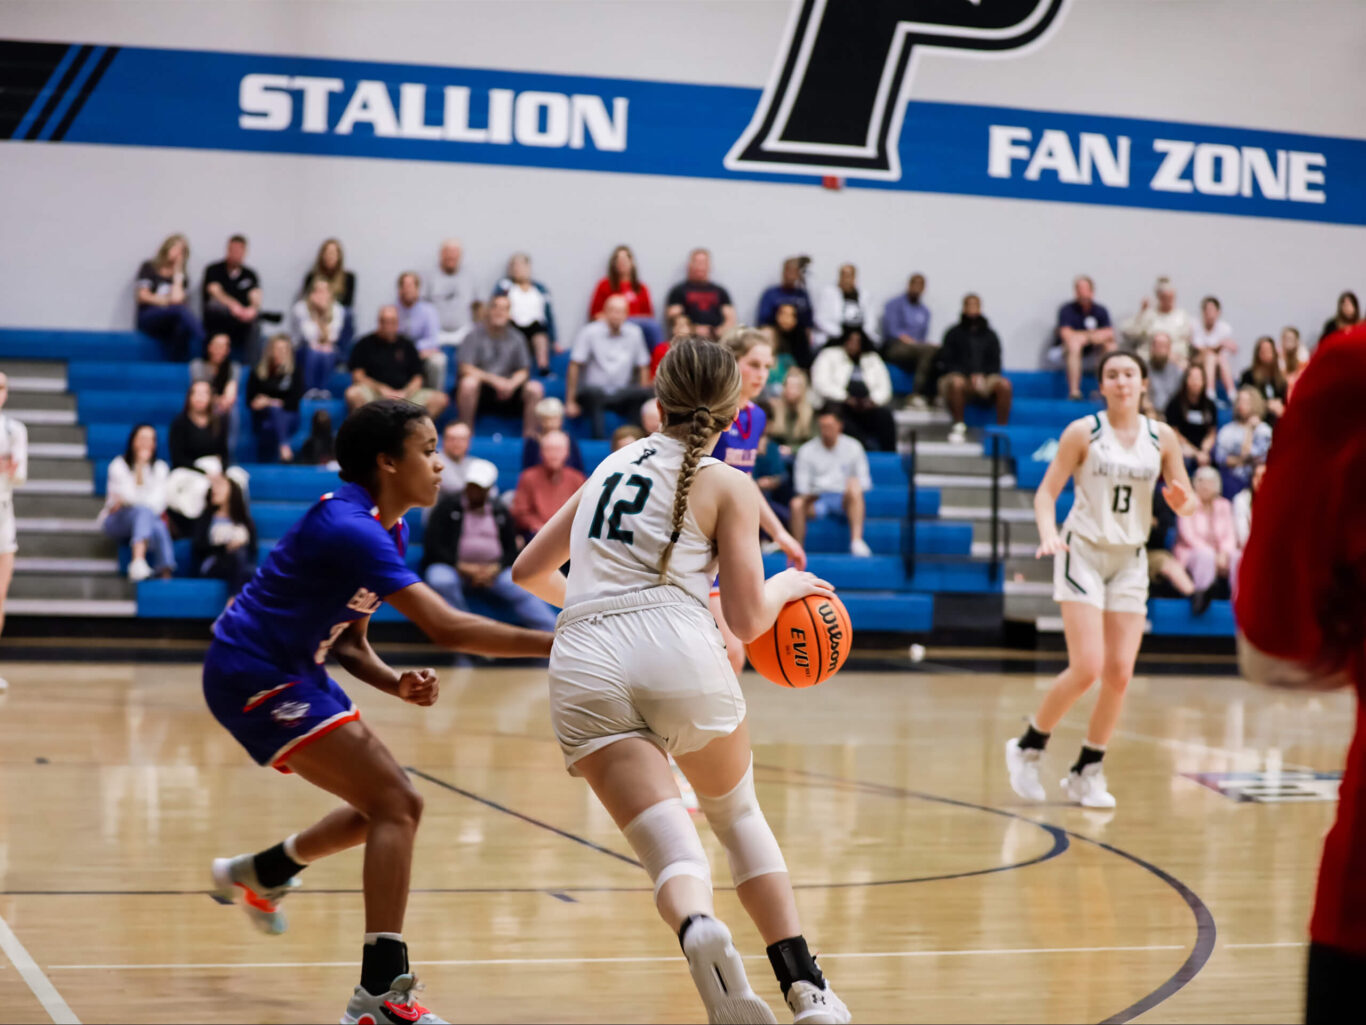 A Girls basketball player confidently dribbling in front of a crowd.